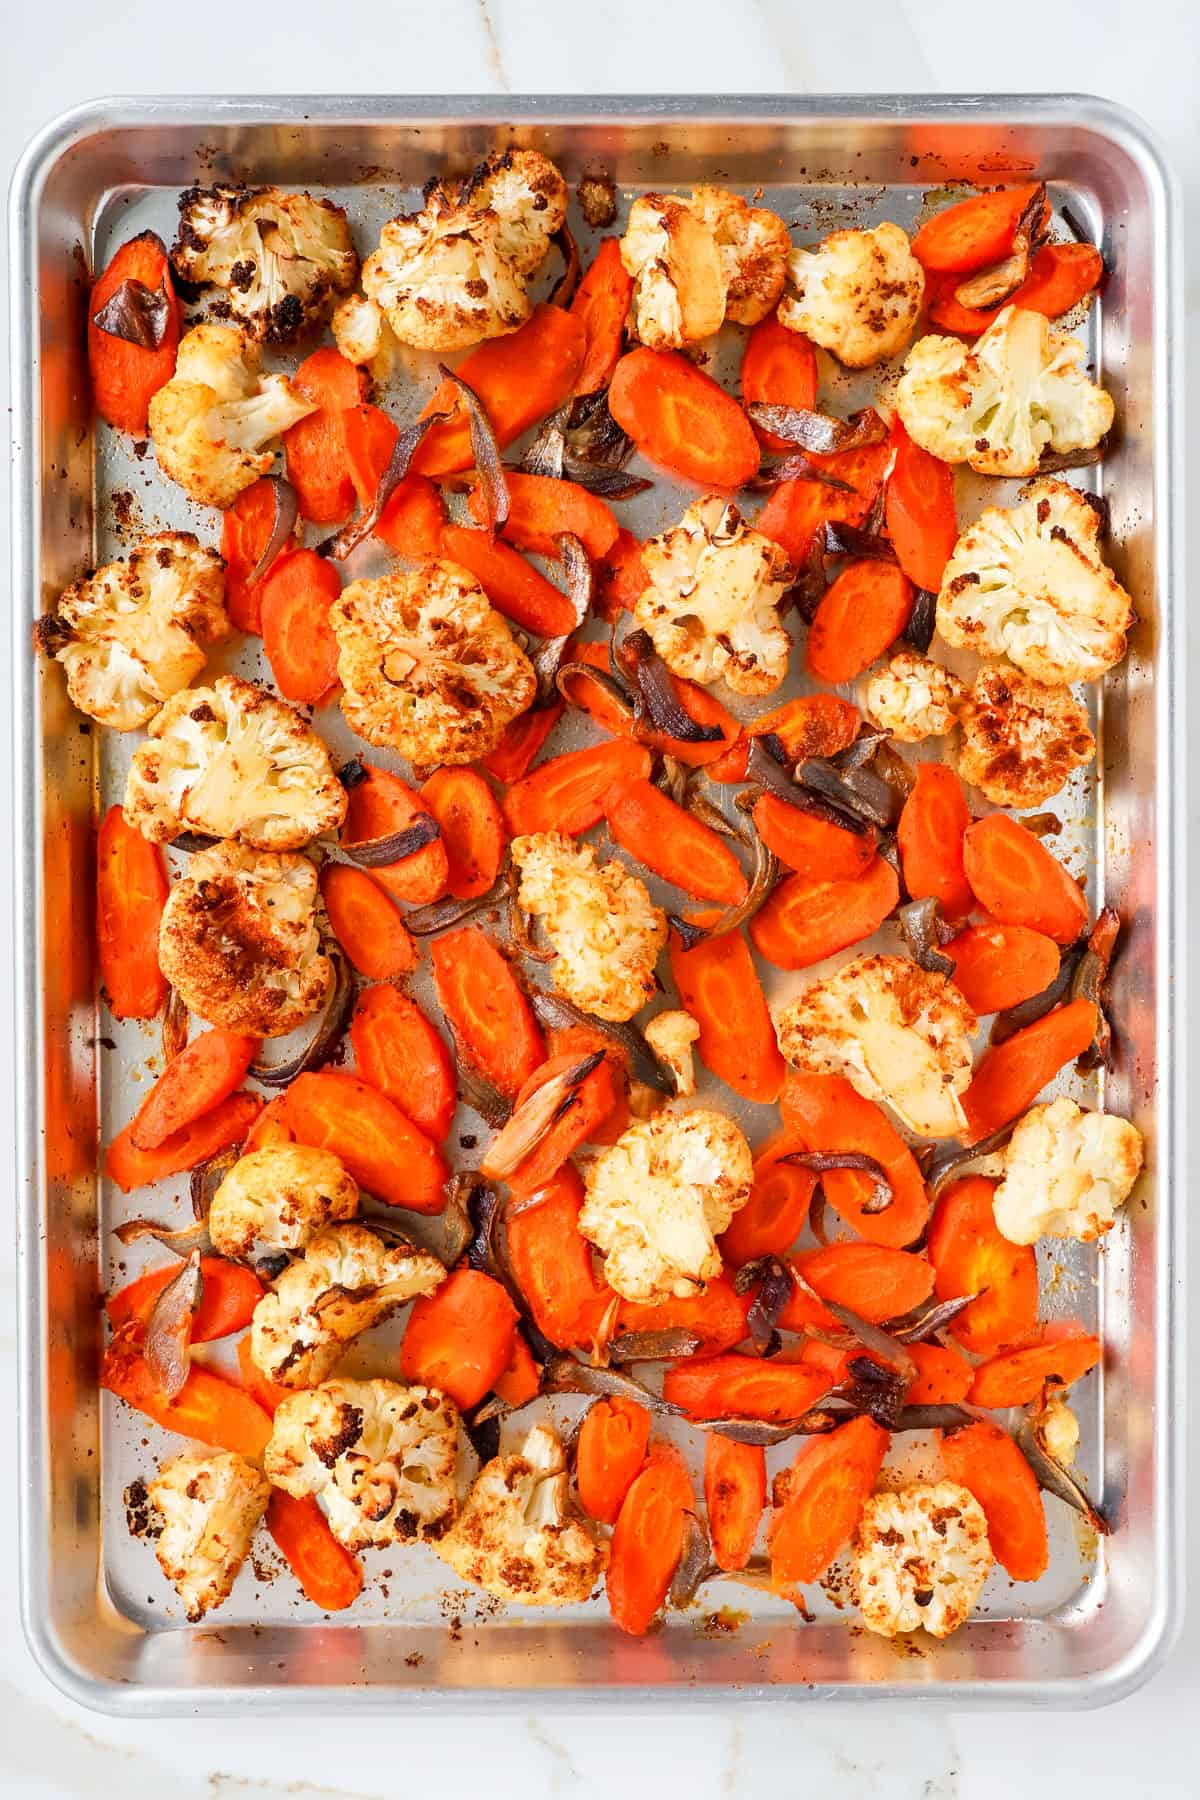 Roasted cauliflower, carrots and onions on a baking sheet.